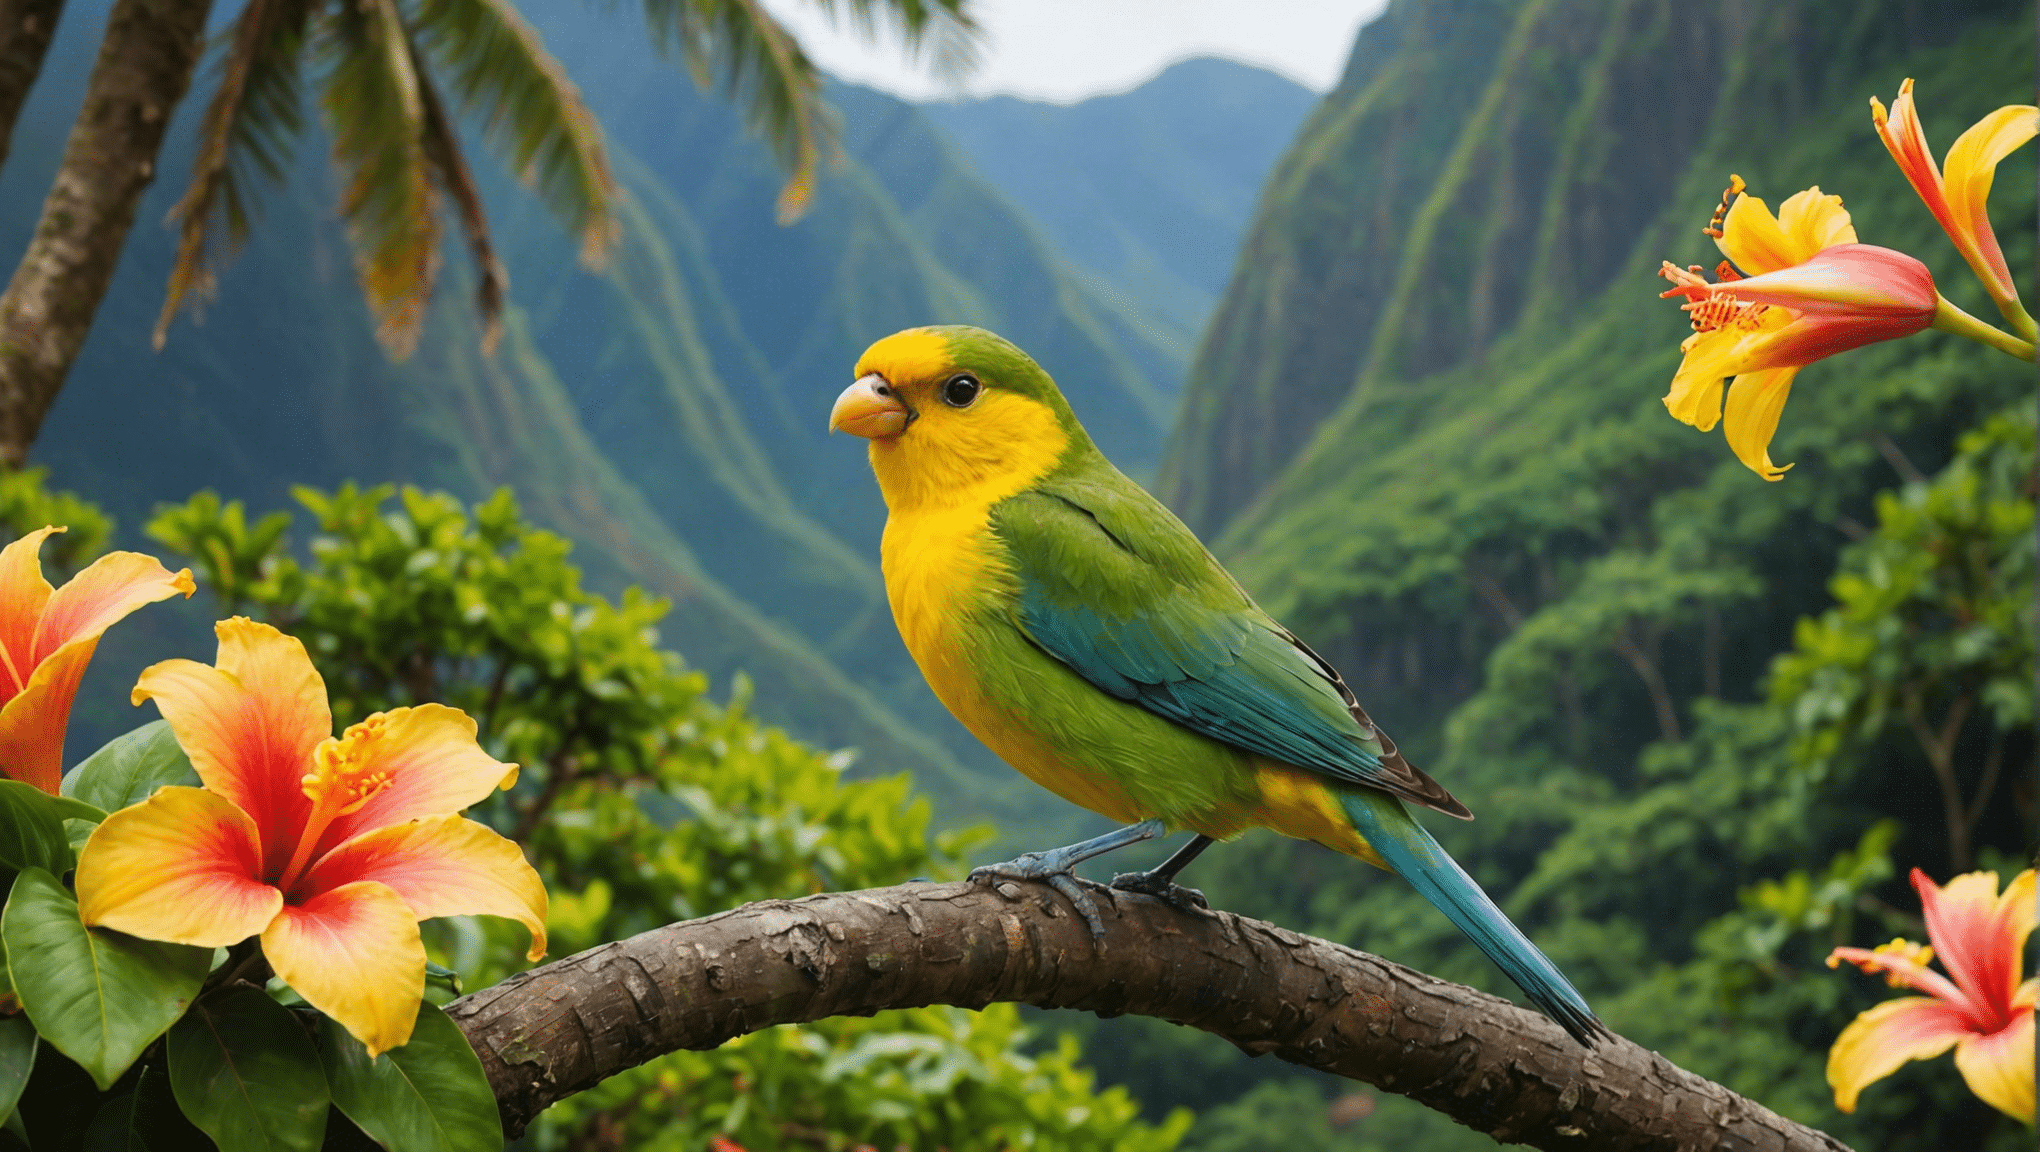 discover the distinctive bird species of hawaii and their fascinating characteristics. explore the unique avian fauna of this island paradise.